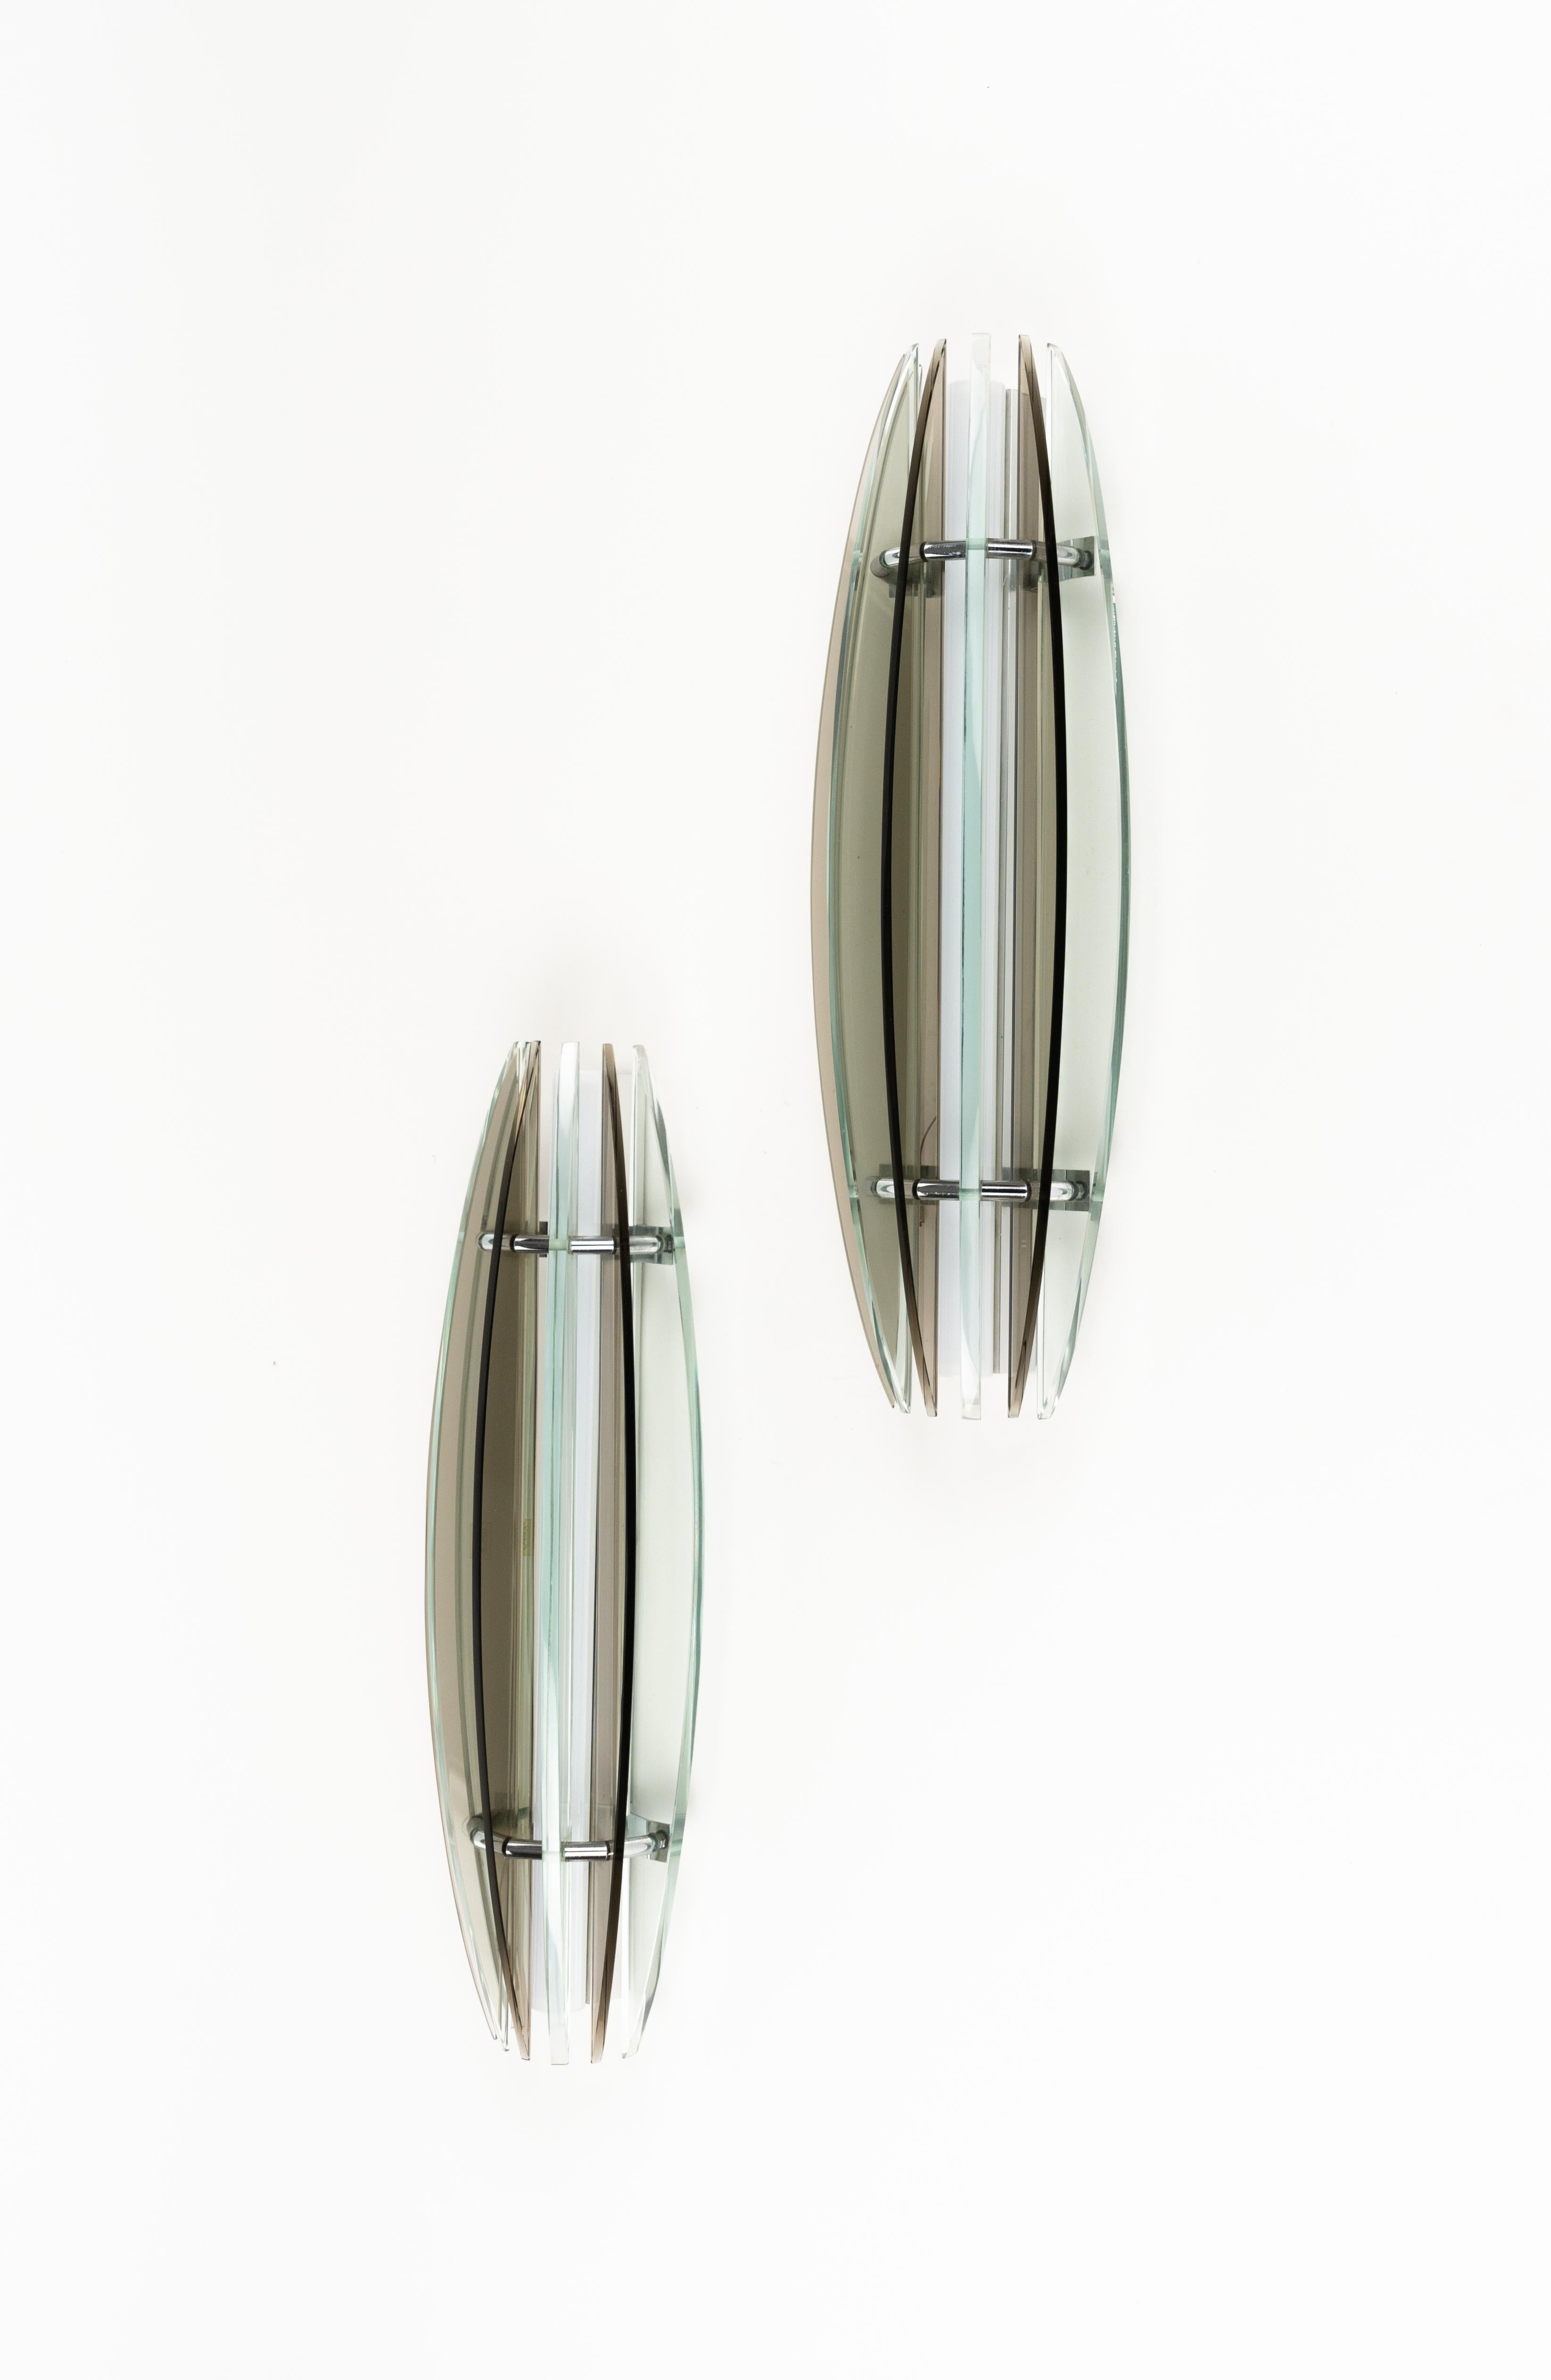 Midcentury Large Pair of Sconces in Colored Glass & Chrome by Veca, Italy, 1970s For Sale 5